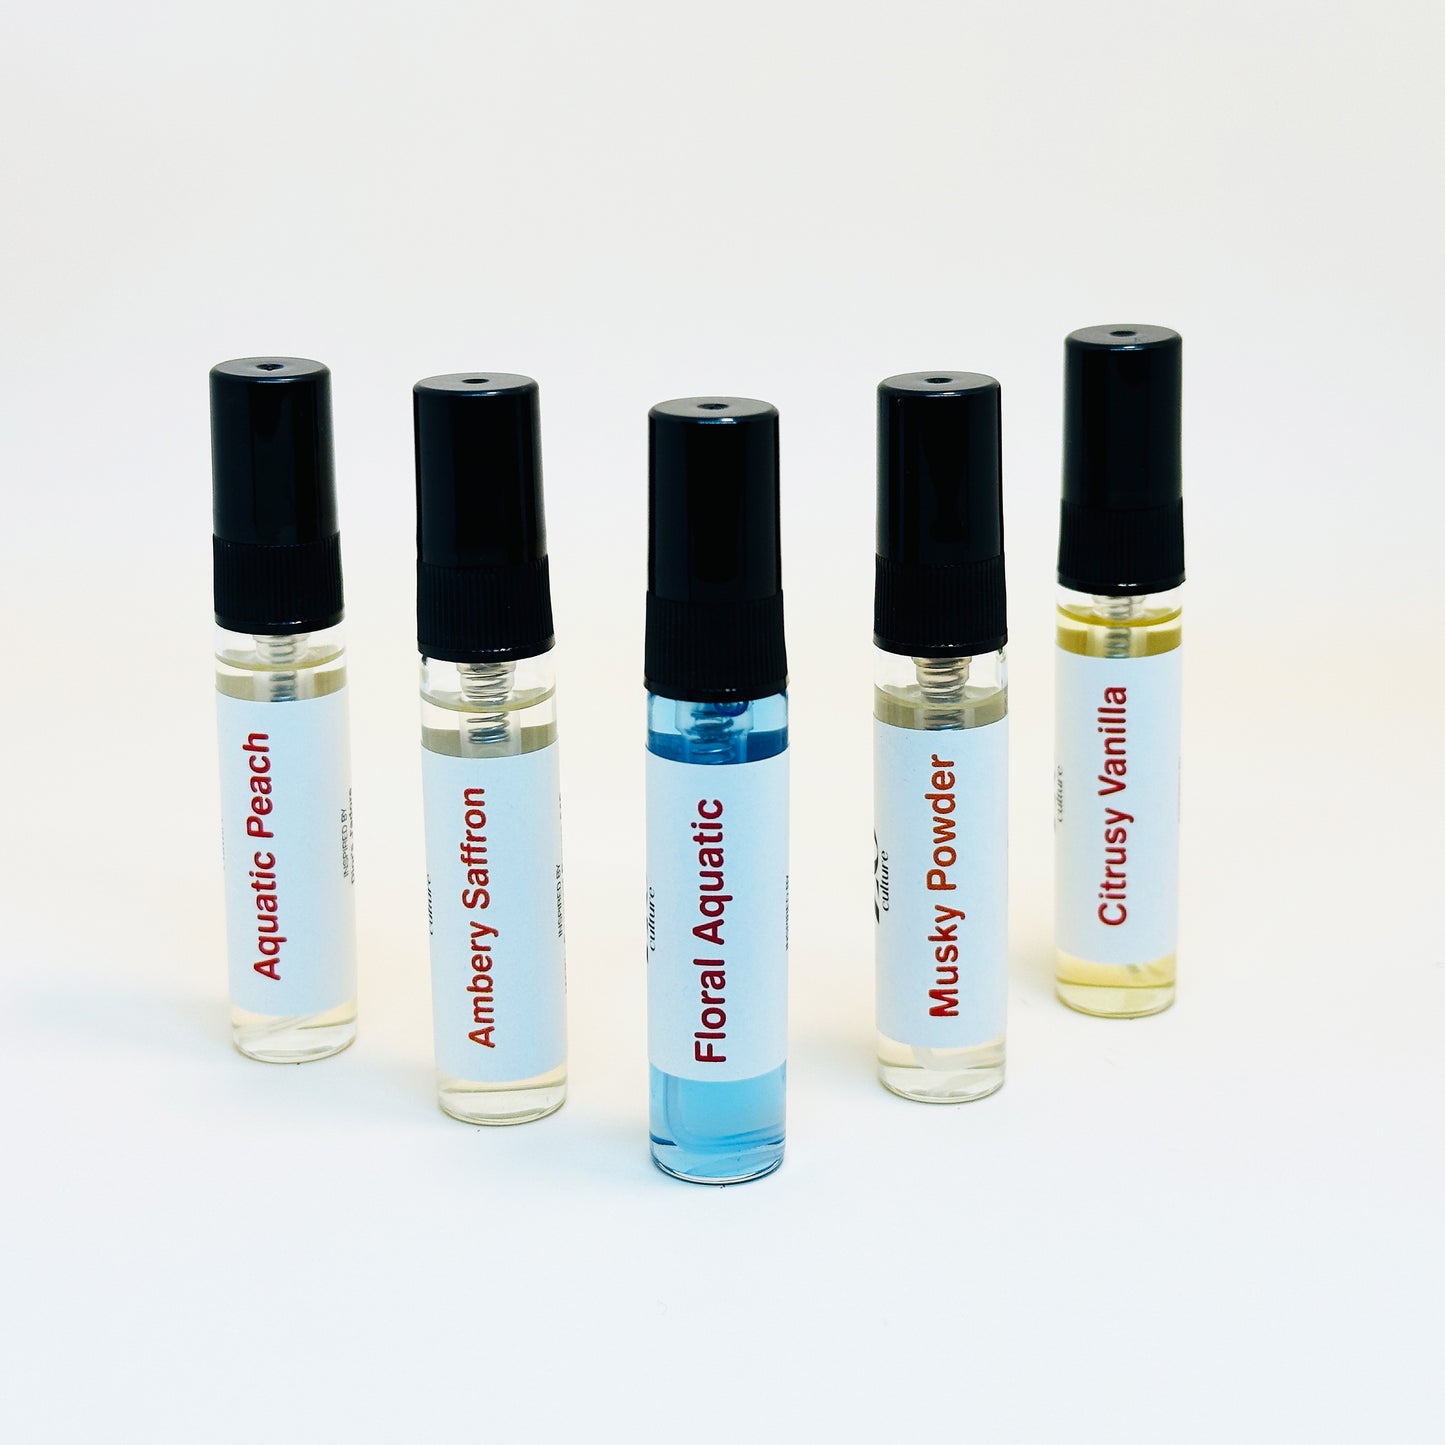 Testers Signature Women Scent Sampler Collection 2 ZoCulture